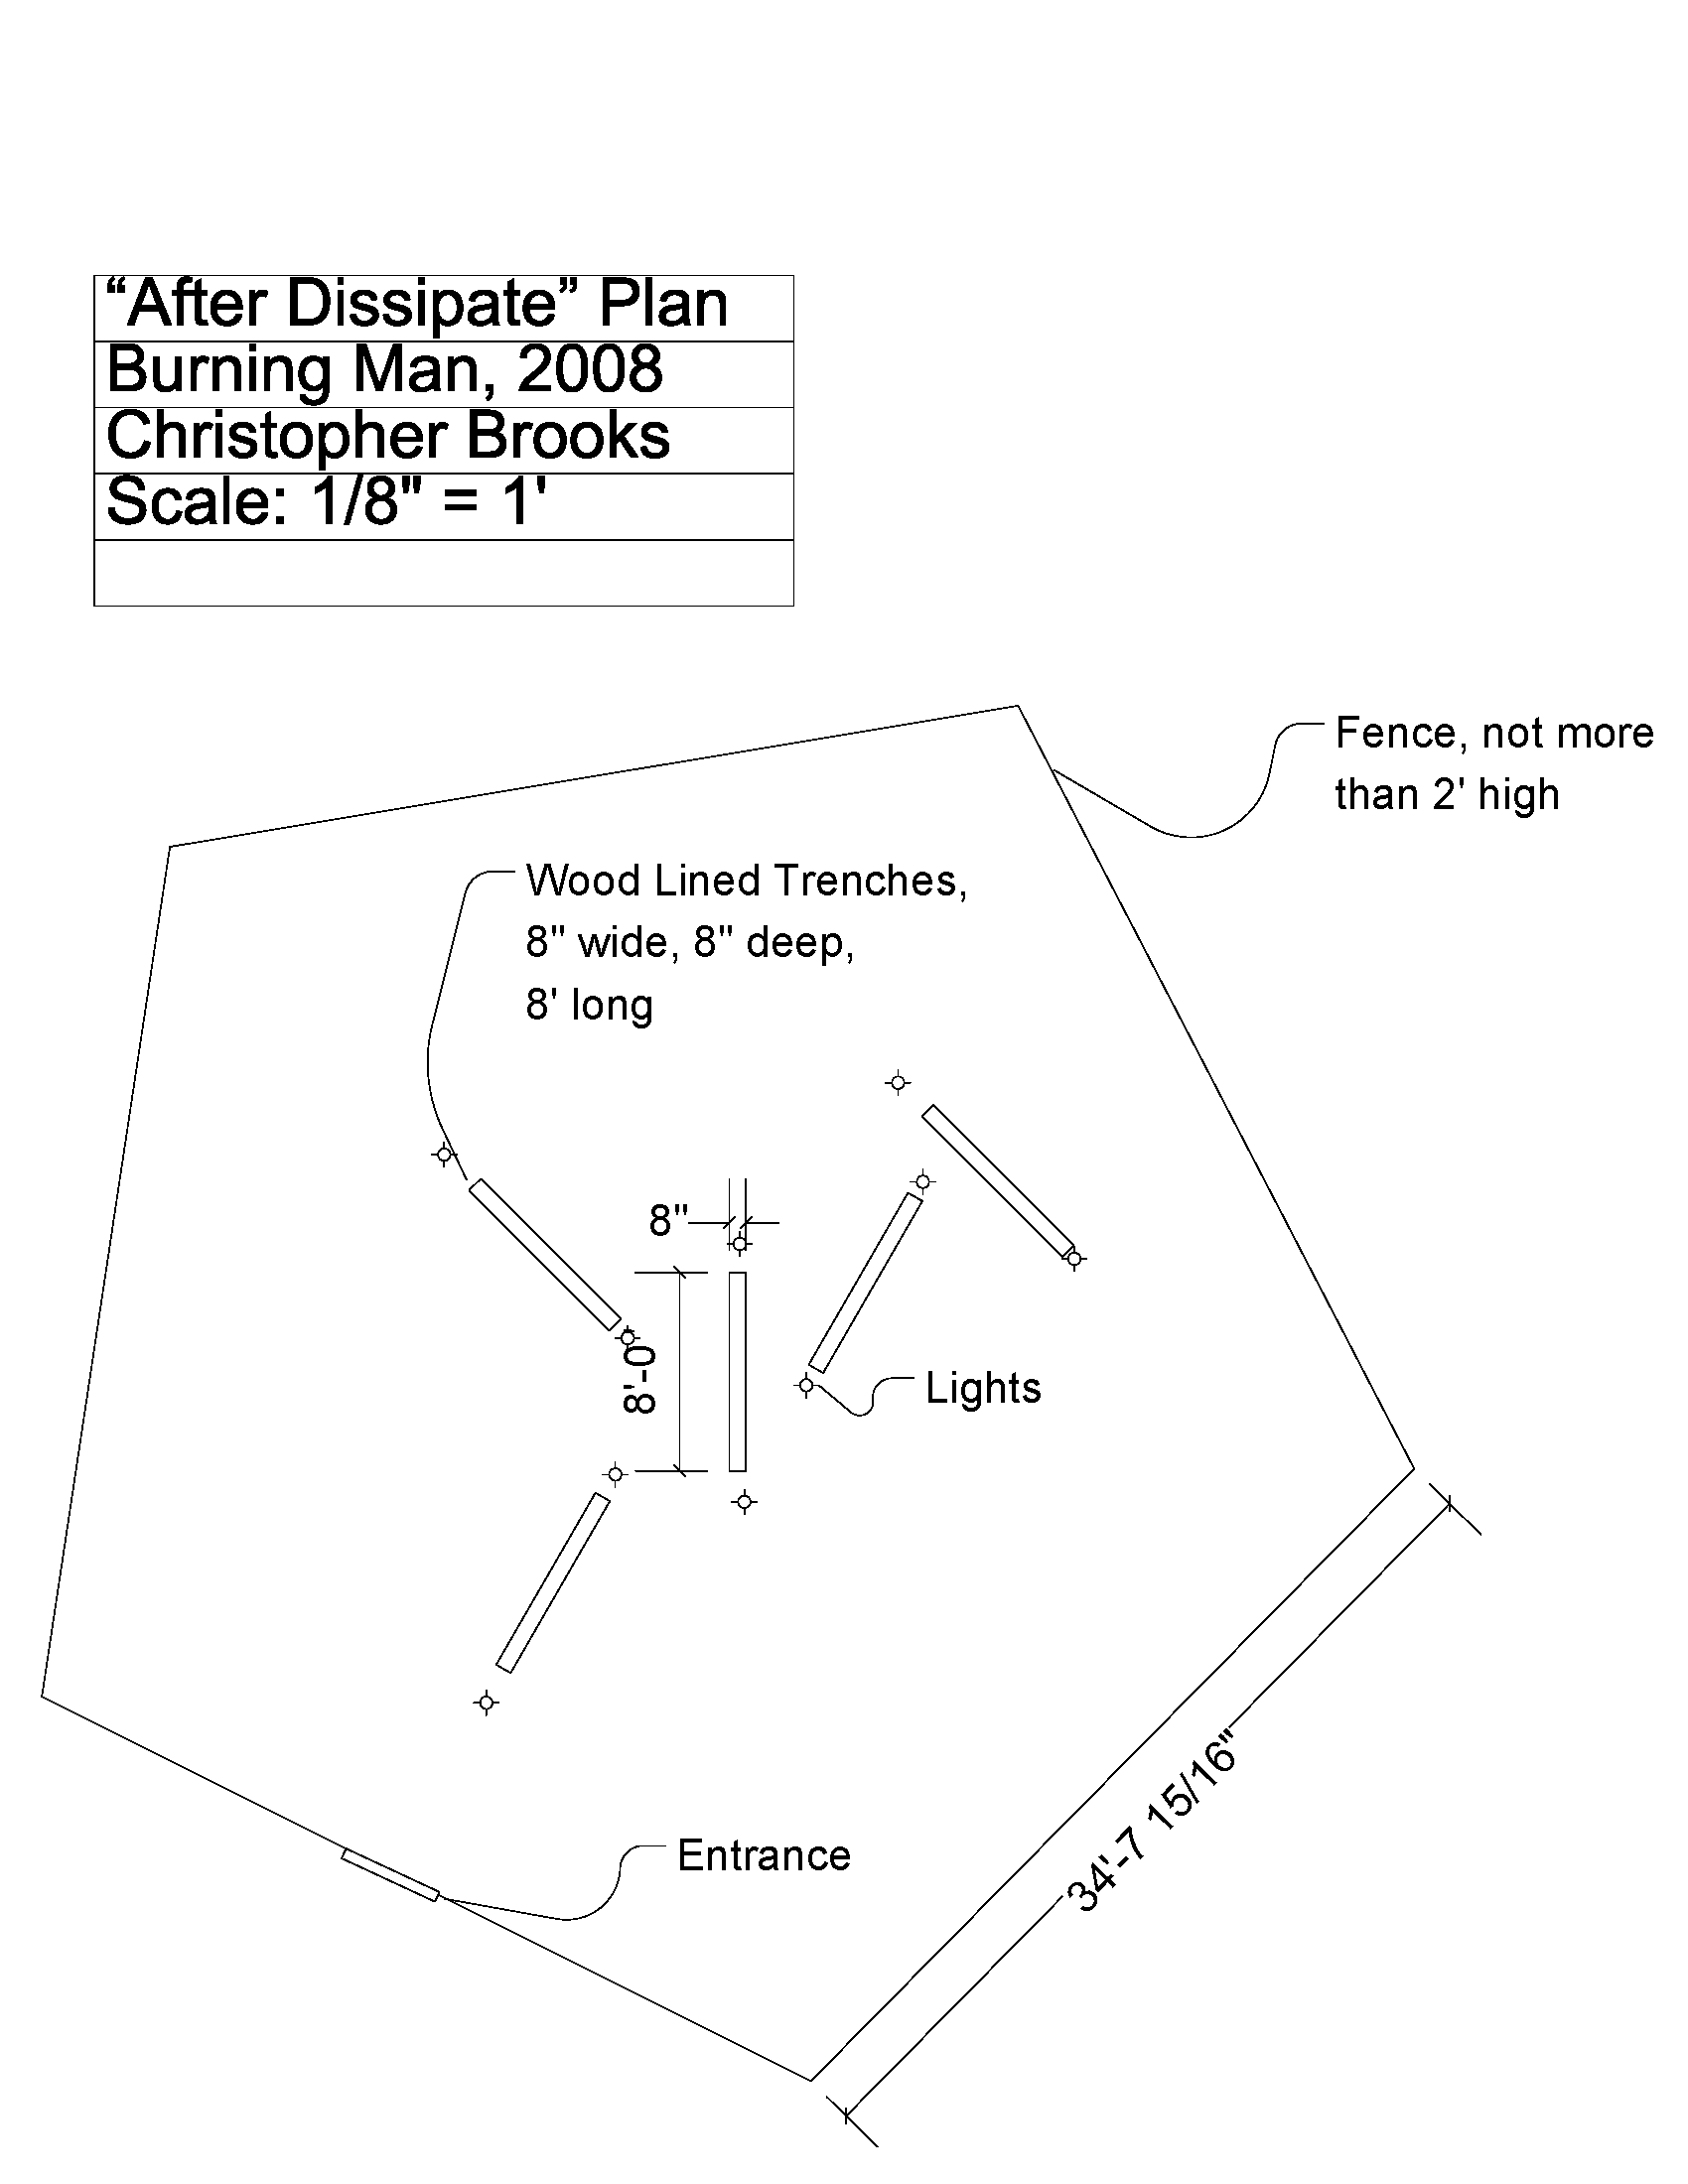 Proposed layout for 'After Dissipate'